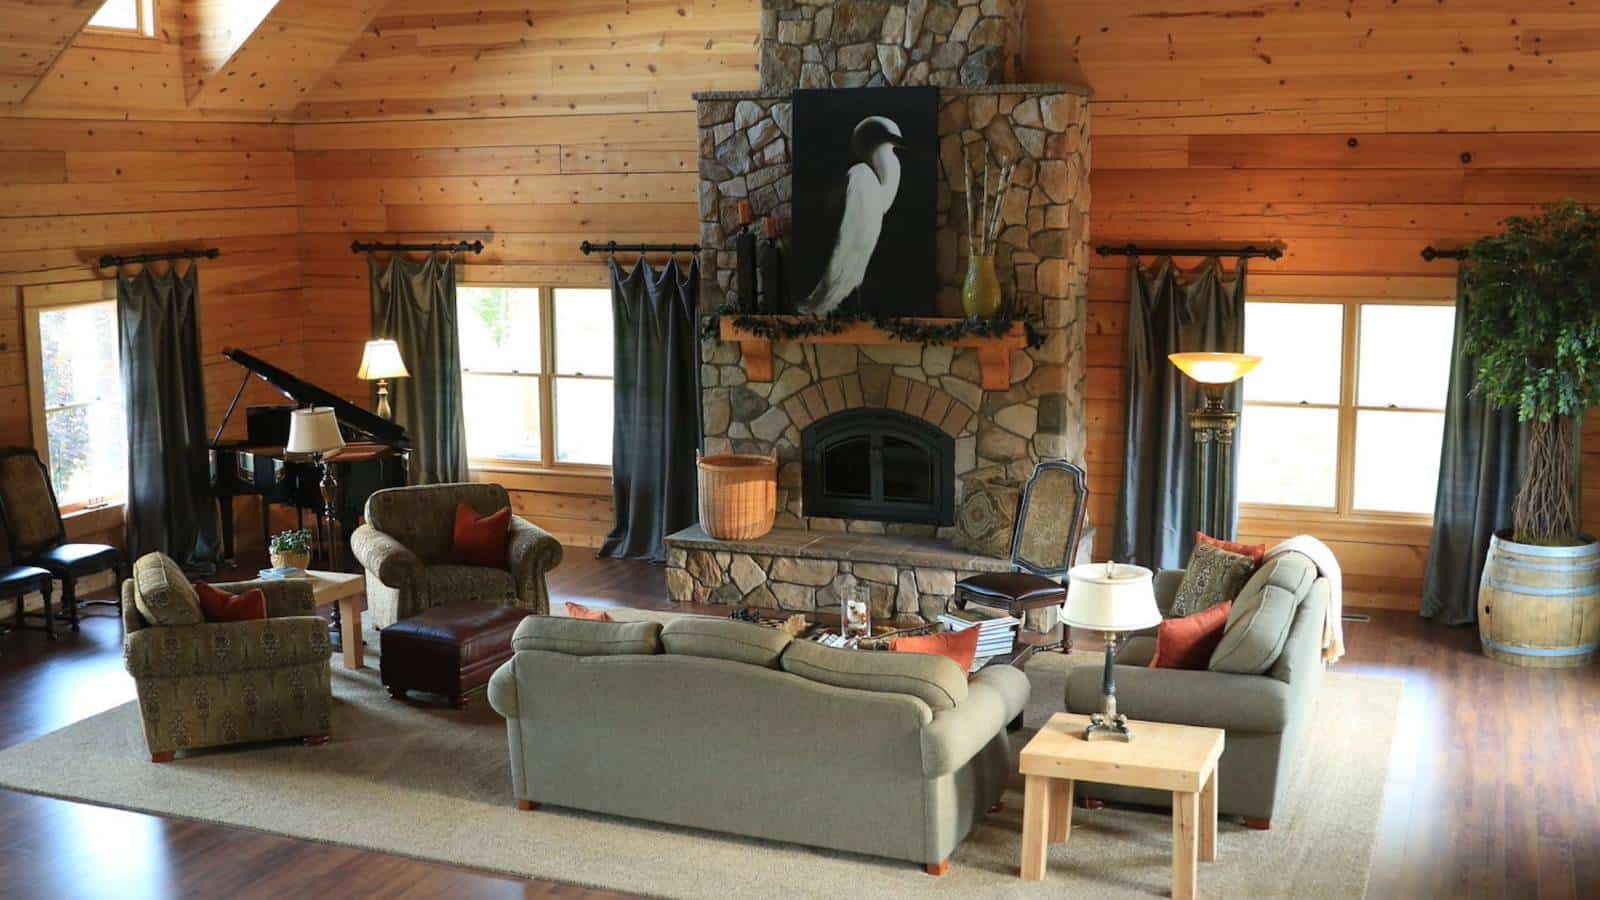 Large great room with wood paneling on the walls, hardwood flooring, upholstered sofa, loveseat and armchairs, large stone fireplace, and black piano in the corner